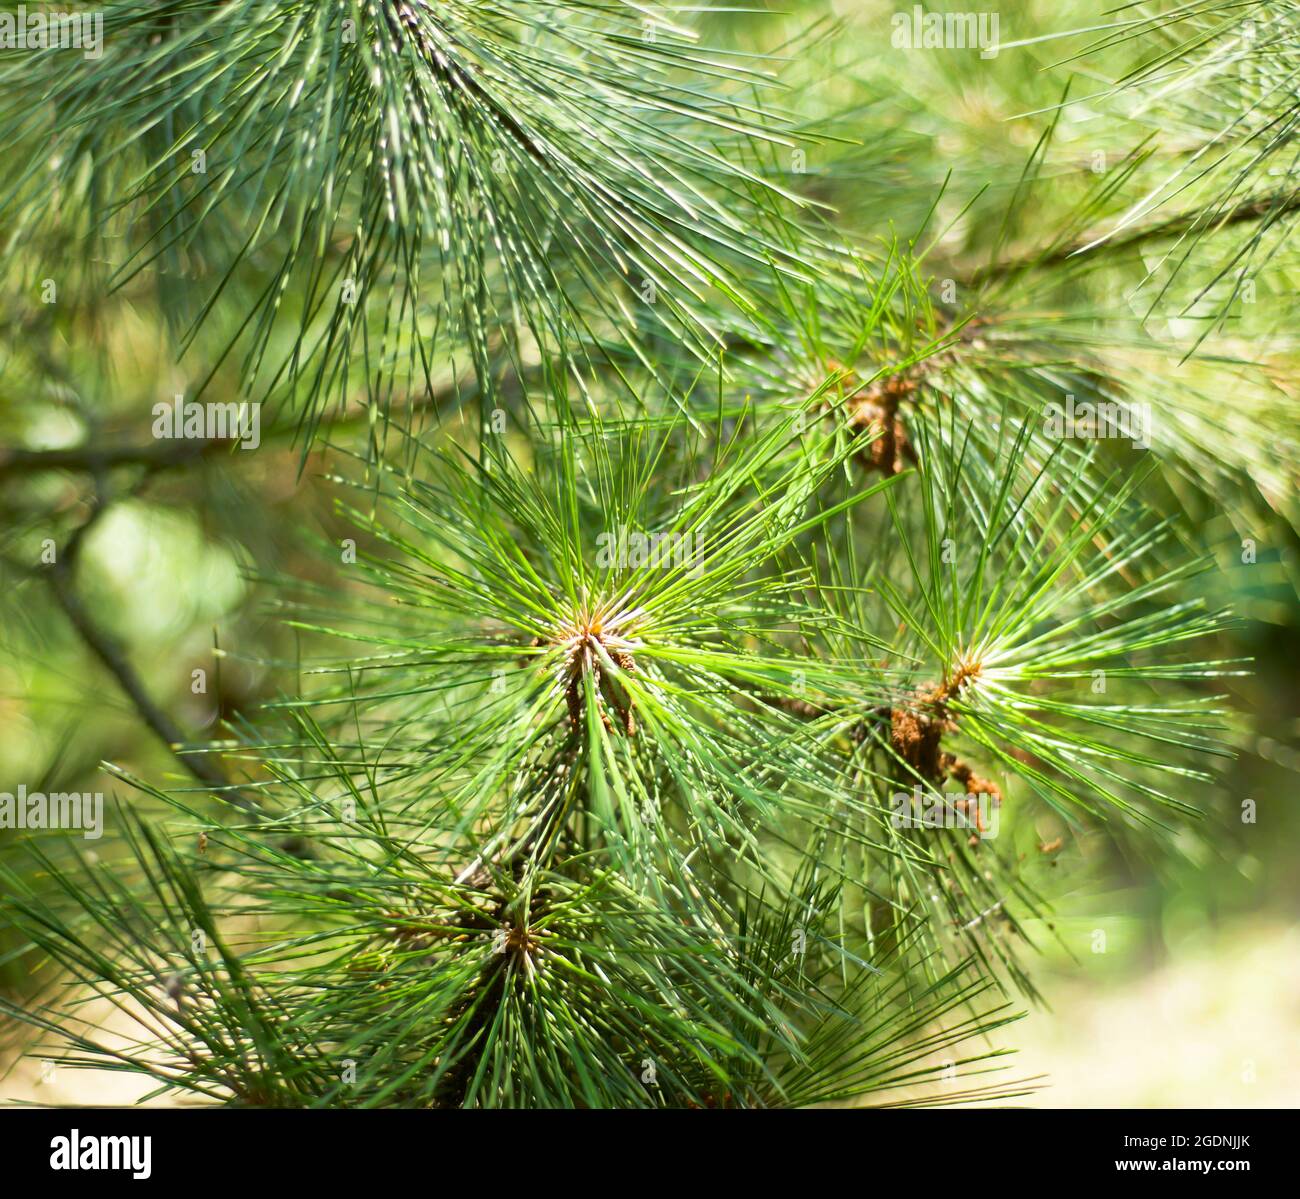 Pine branches close up. Pine green background. Themes of forest and ecology. Stock Photo